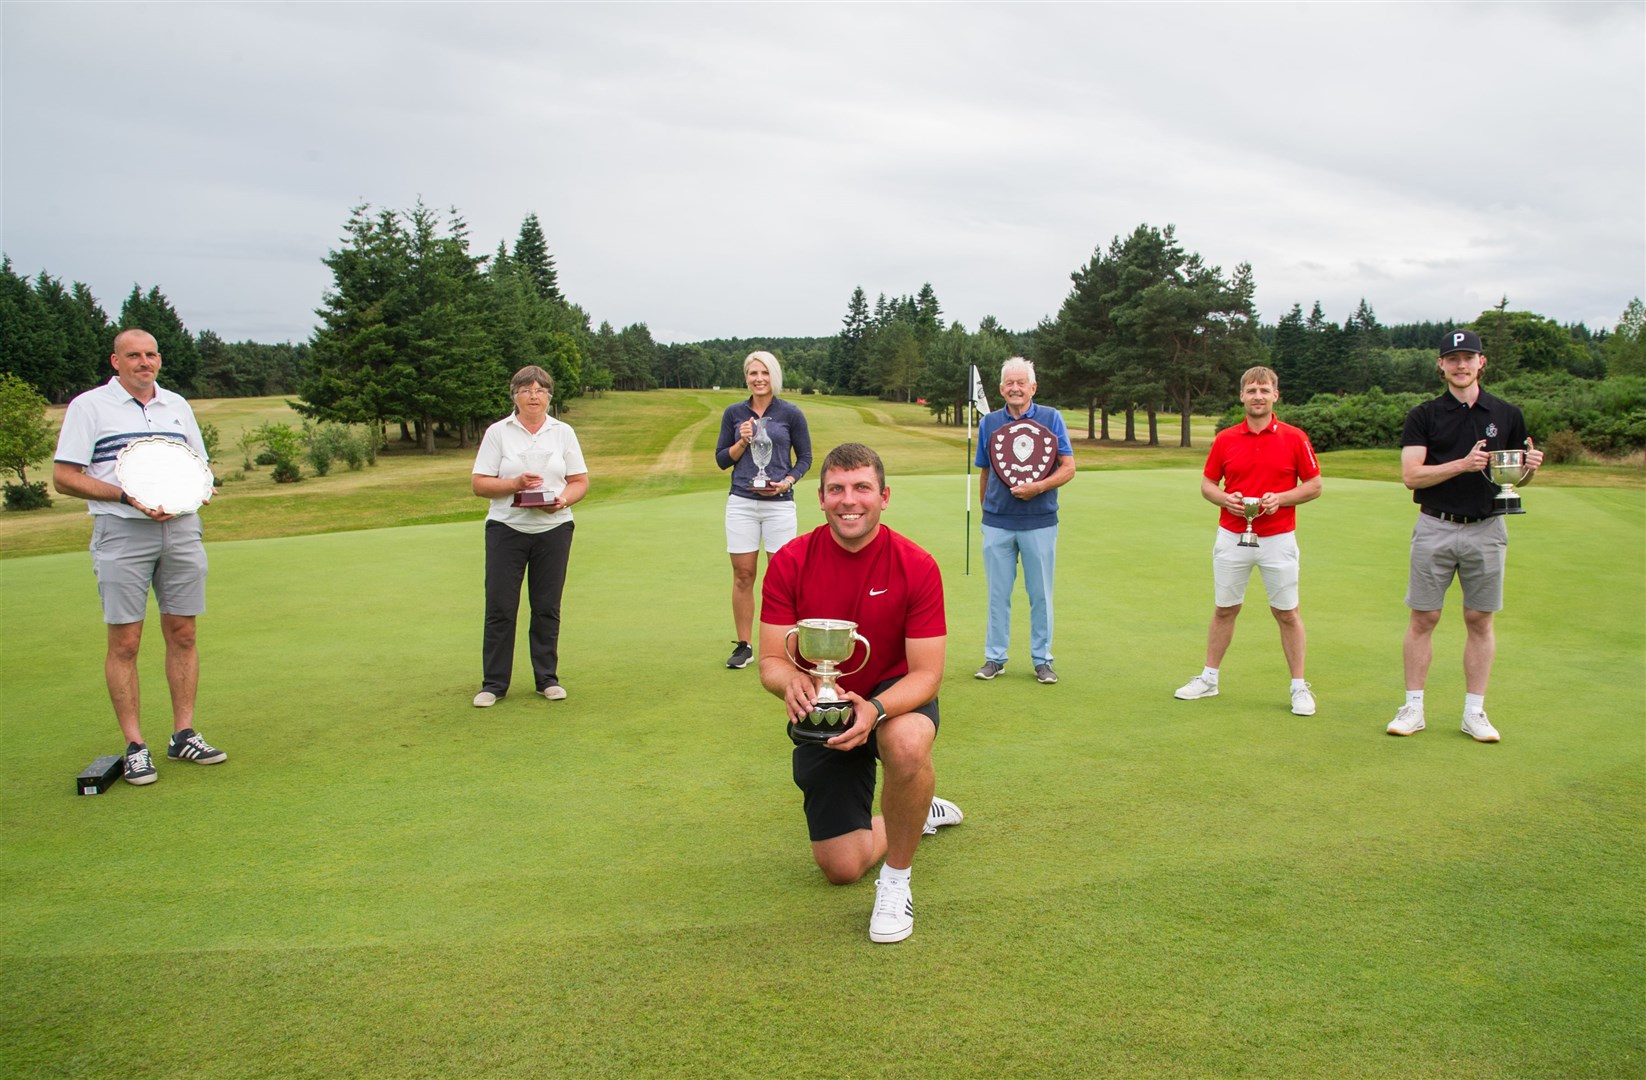 Elgin Golf Club 5-day open winners, from left: Grant Weatherston, Barbara Lock, Rebecca Grant, Bill Thomson, James Pirie and Cameron Milne with Greg Yeates in front. Picture: Becky Saunderson..